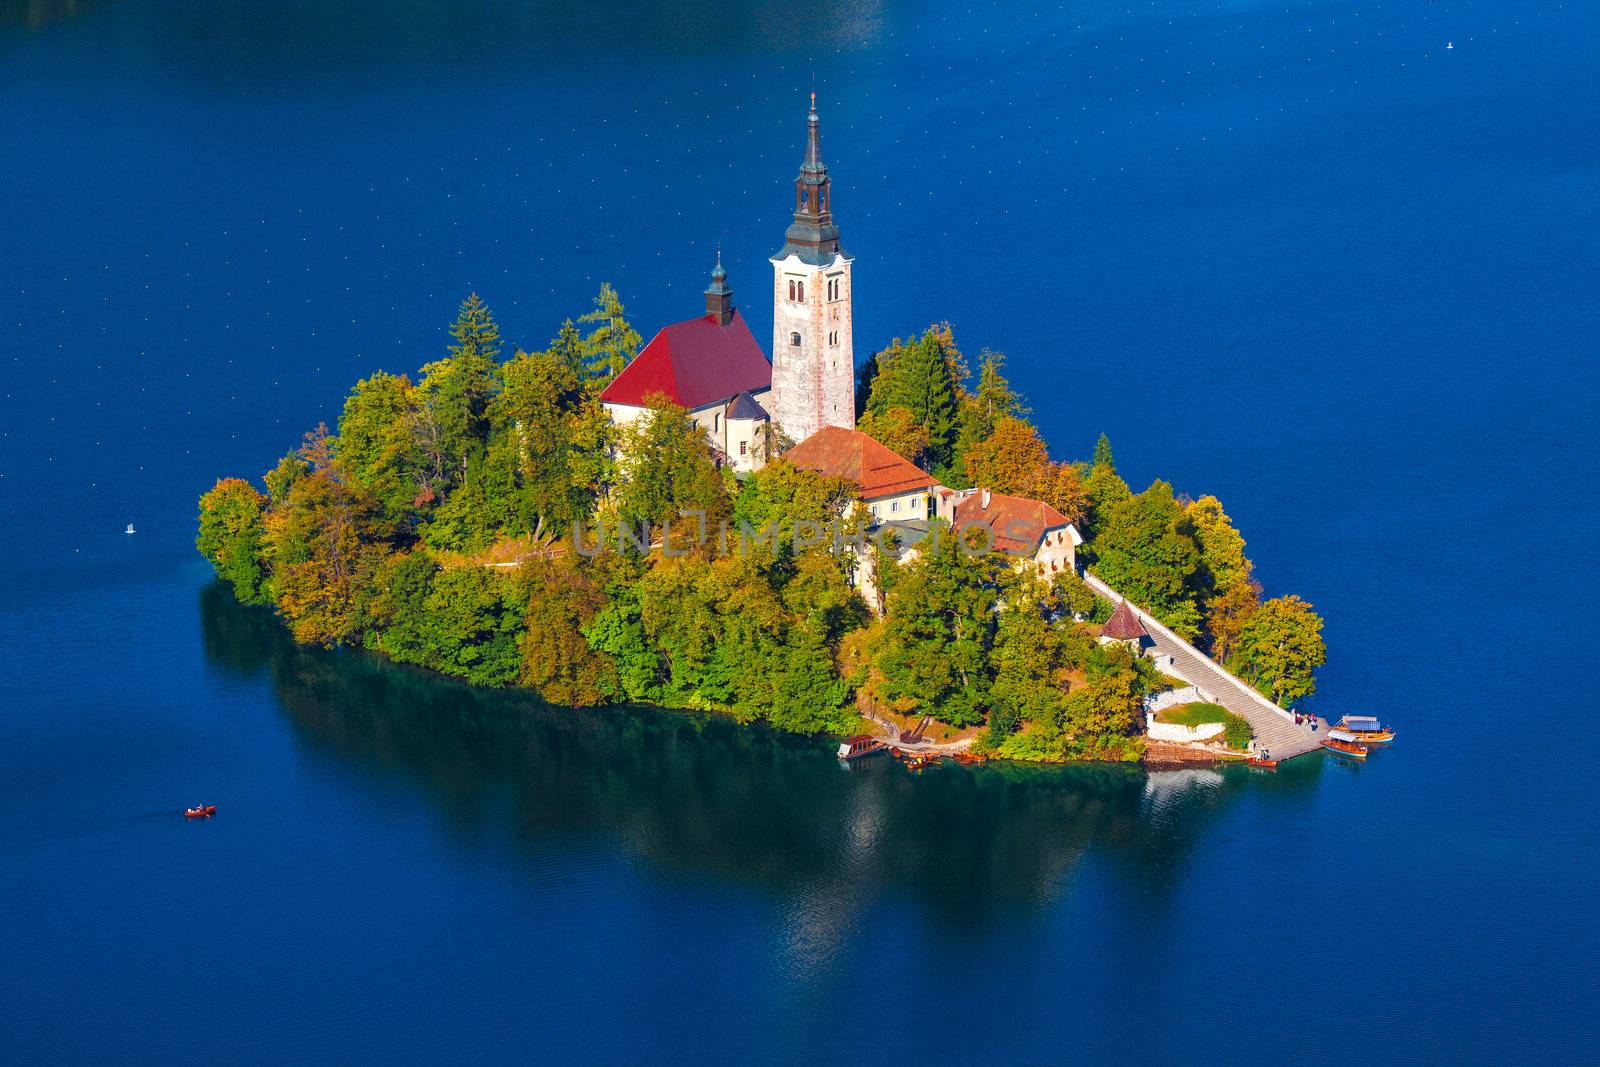 Island on Lake Bled in Slovenia, with the  Church of the Assumption